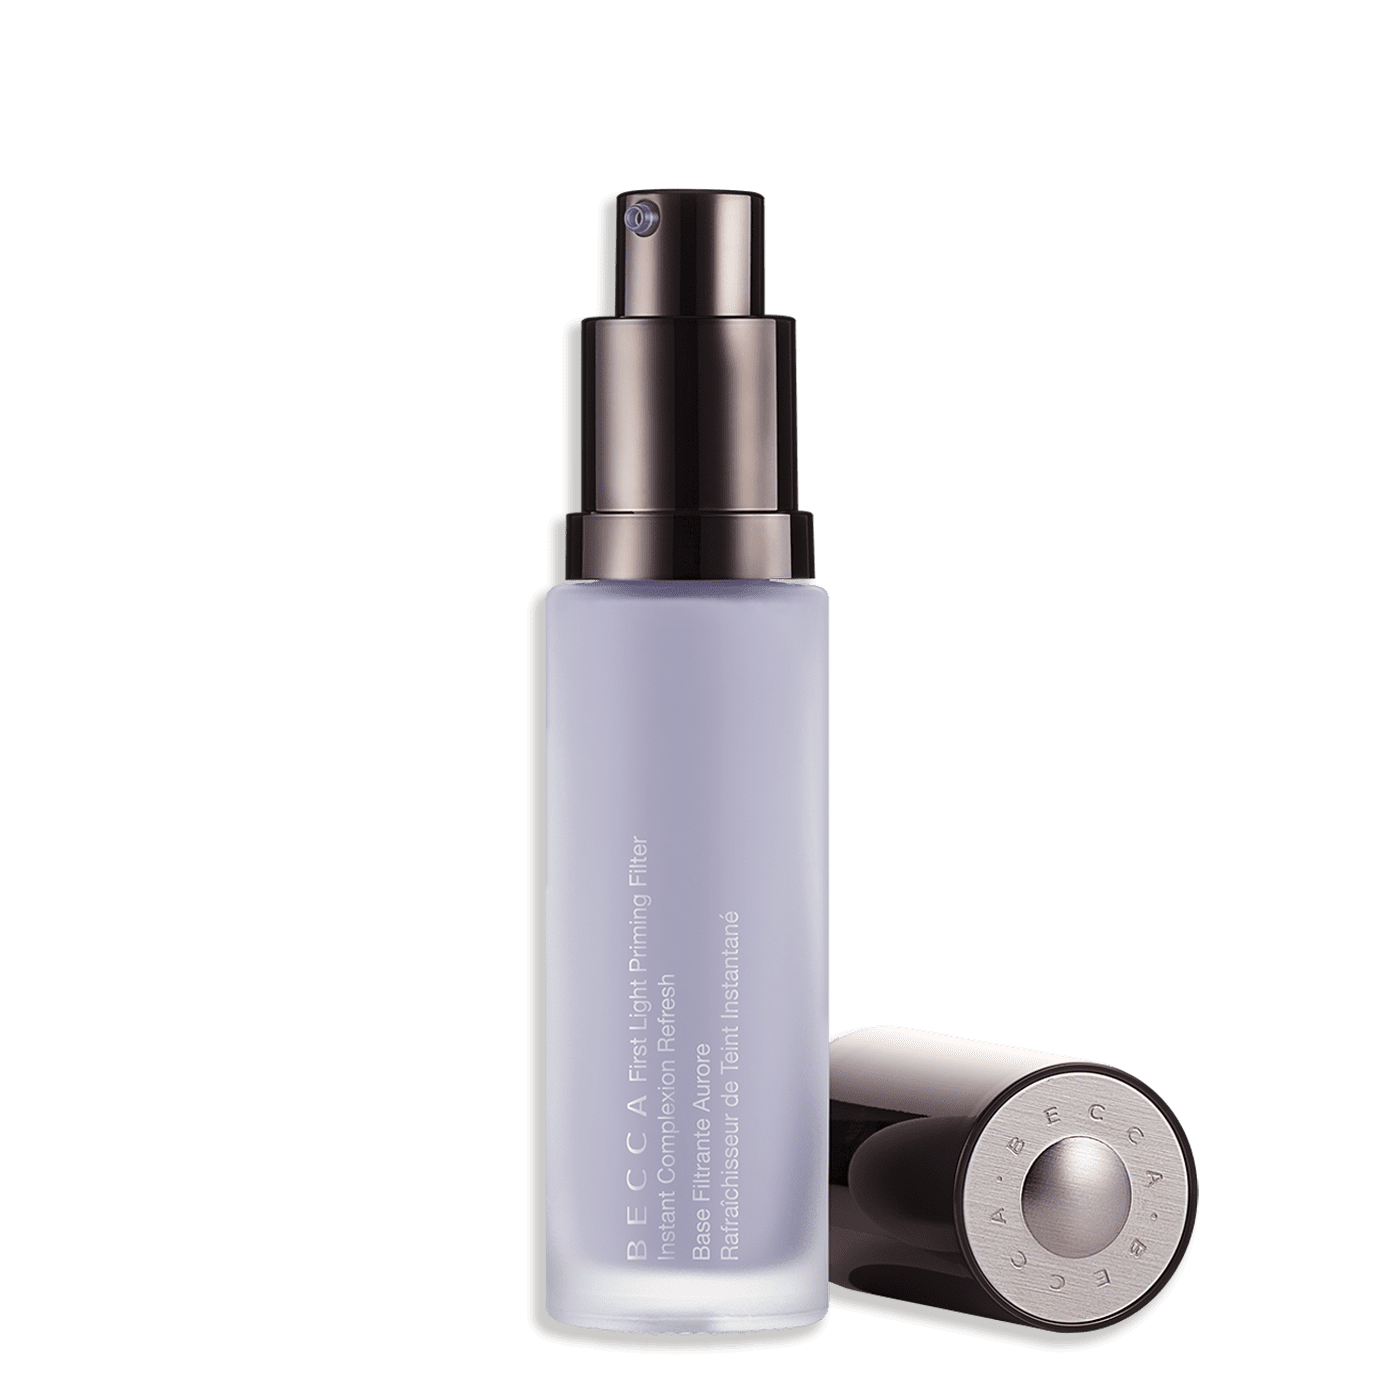 Becca-first-light-priming-filter-radiant-fresh-base-more-hydration-more-glow